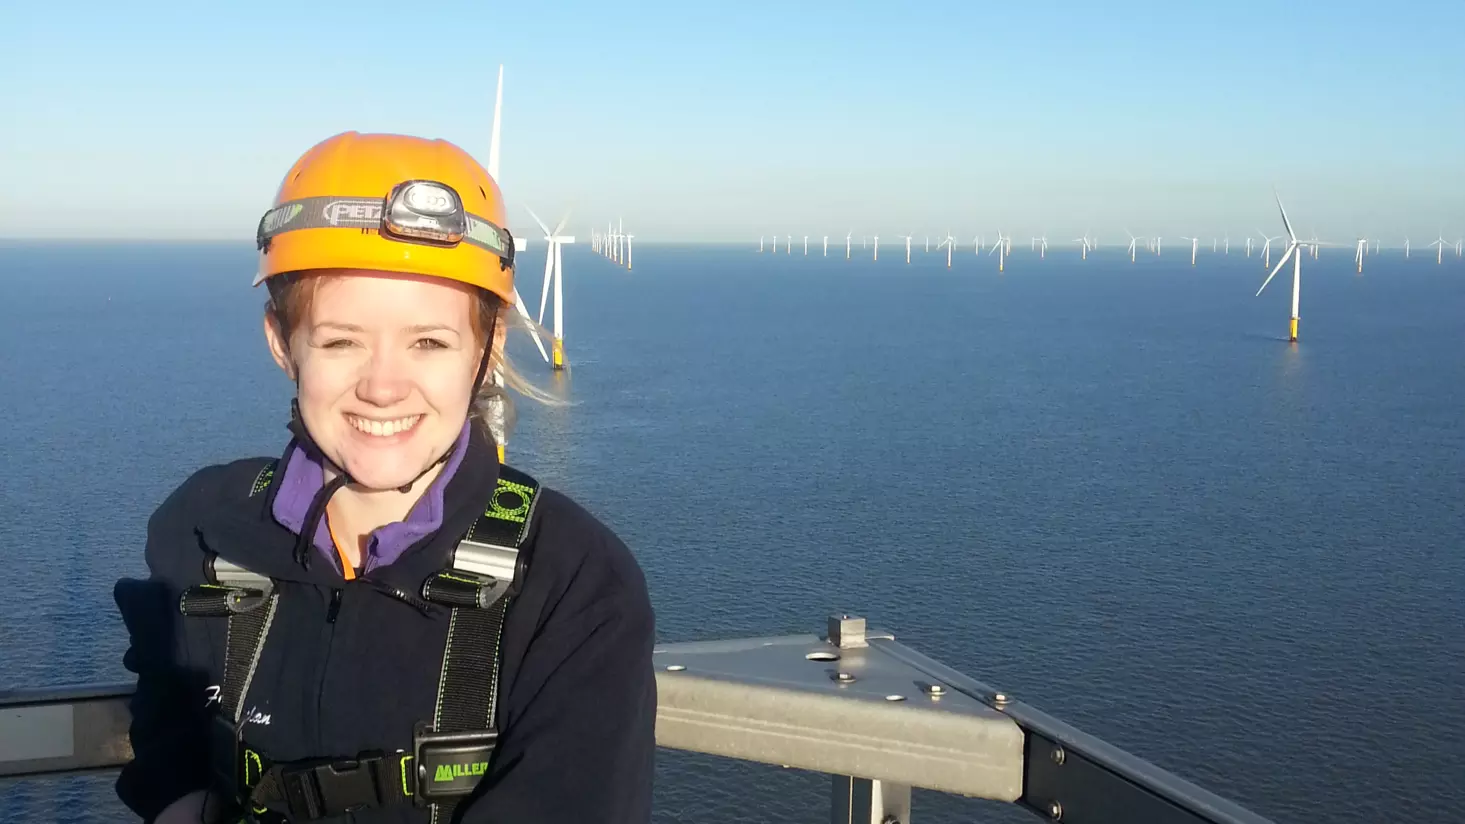 Fiona at an offshore wind farm, one of the happiest moments in her career